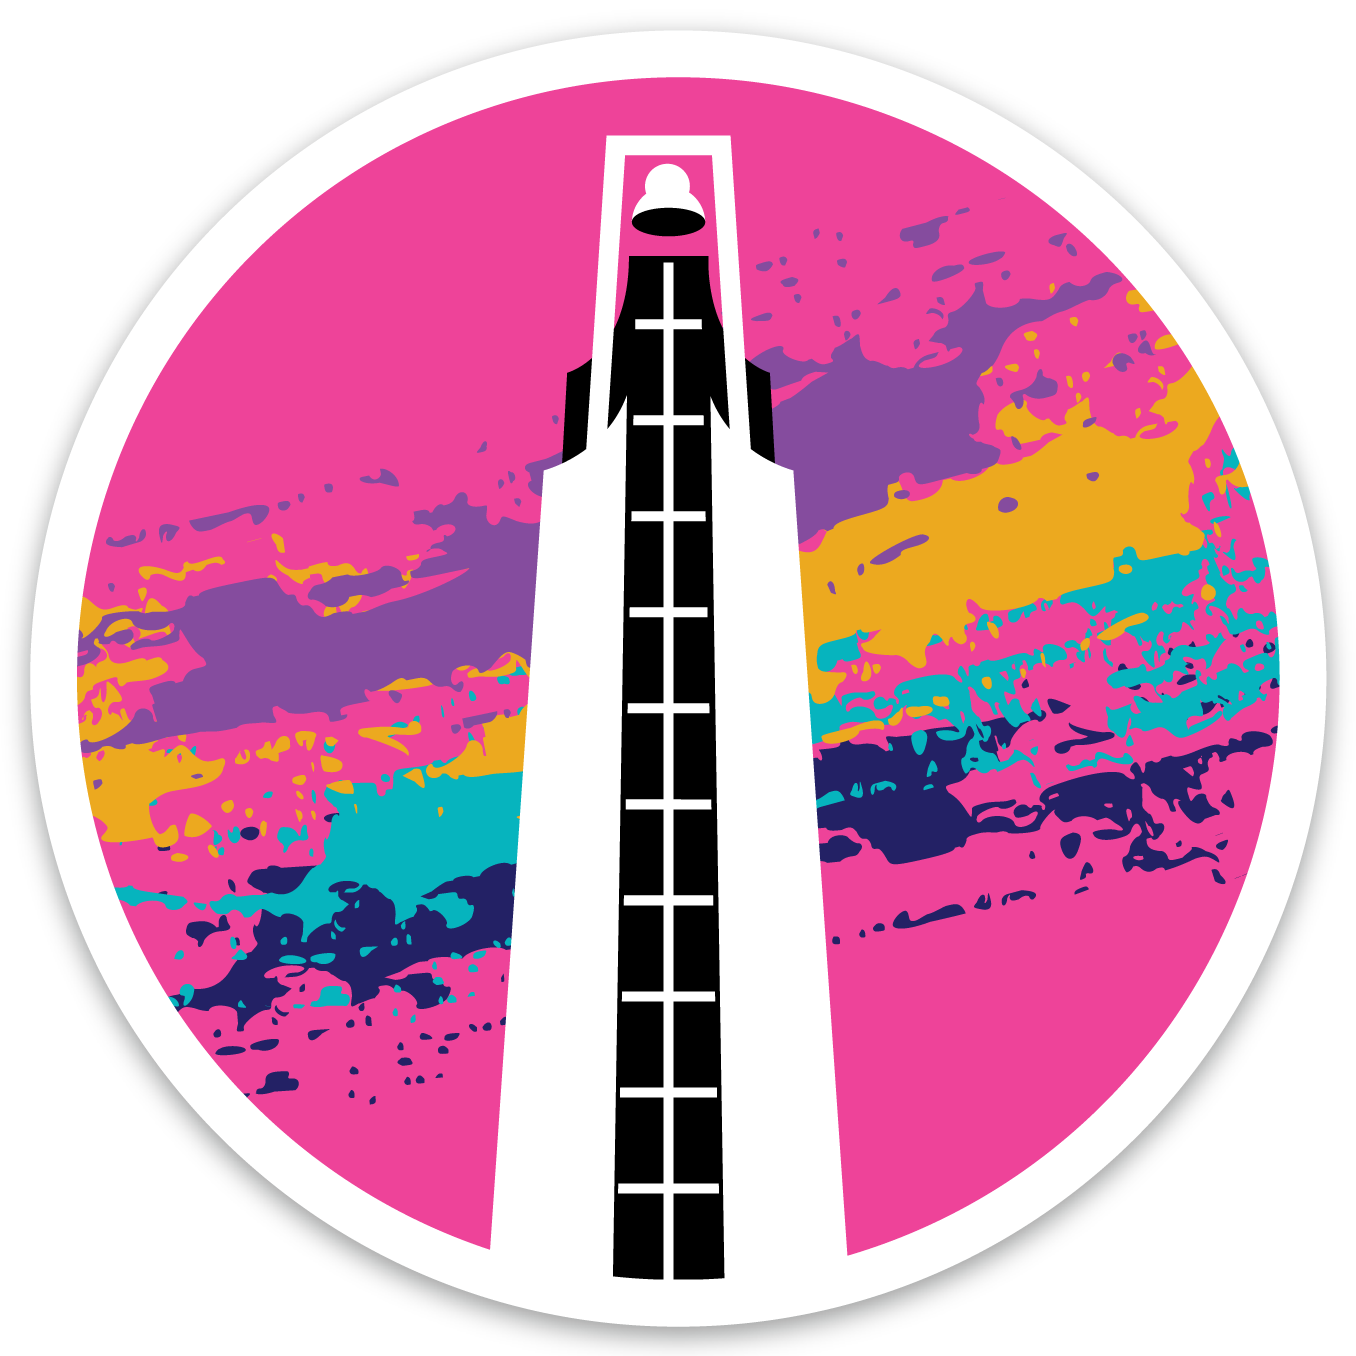 Circle-shaped magnet. Pink background with a black and white drawing of a bell tower. Turqouise, navy, mustard, and purple splotches behind the bell tower.